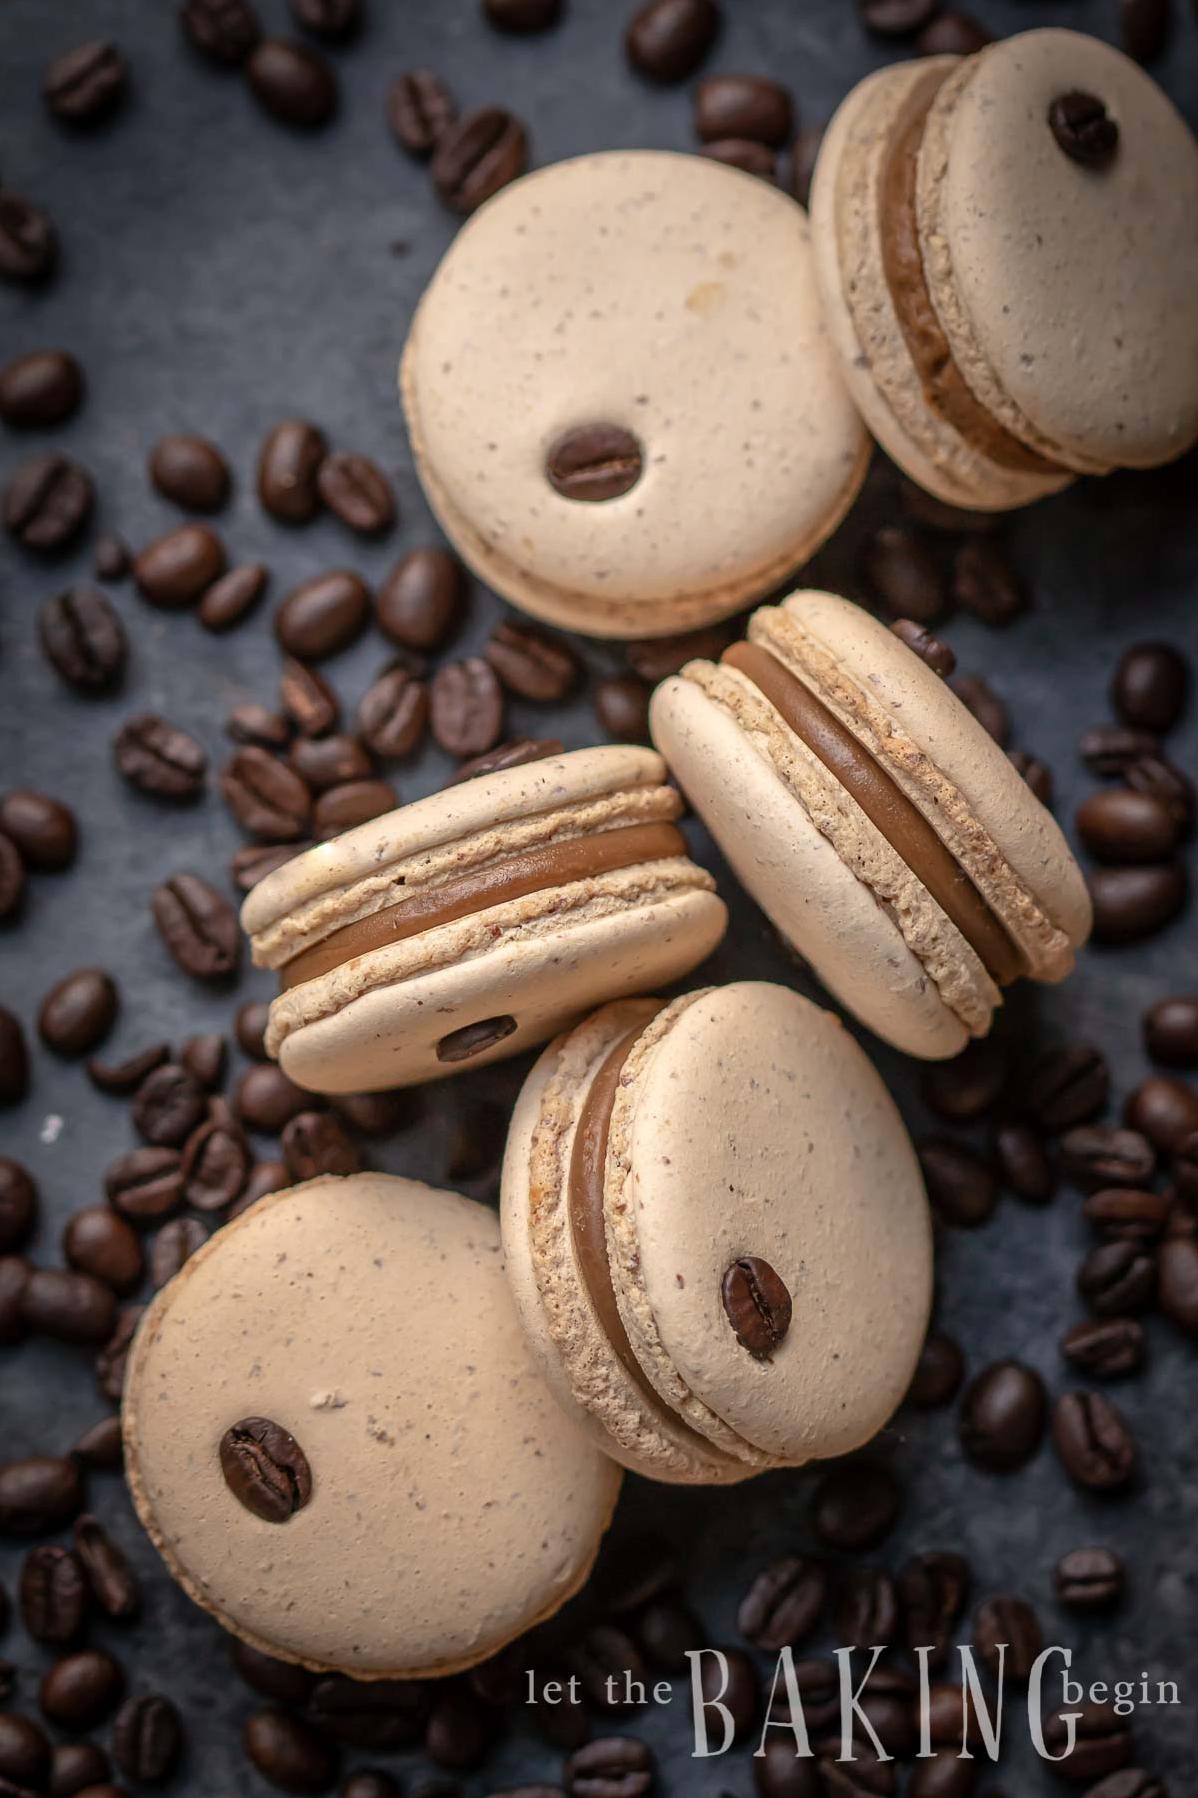  Crunchy on the outside, soft on the inside – that's what makes these macaroons so irresistible.